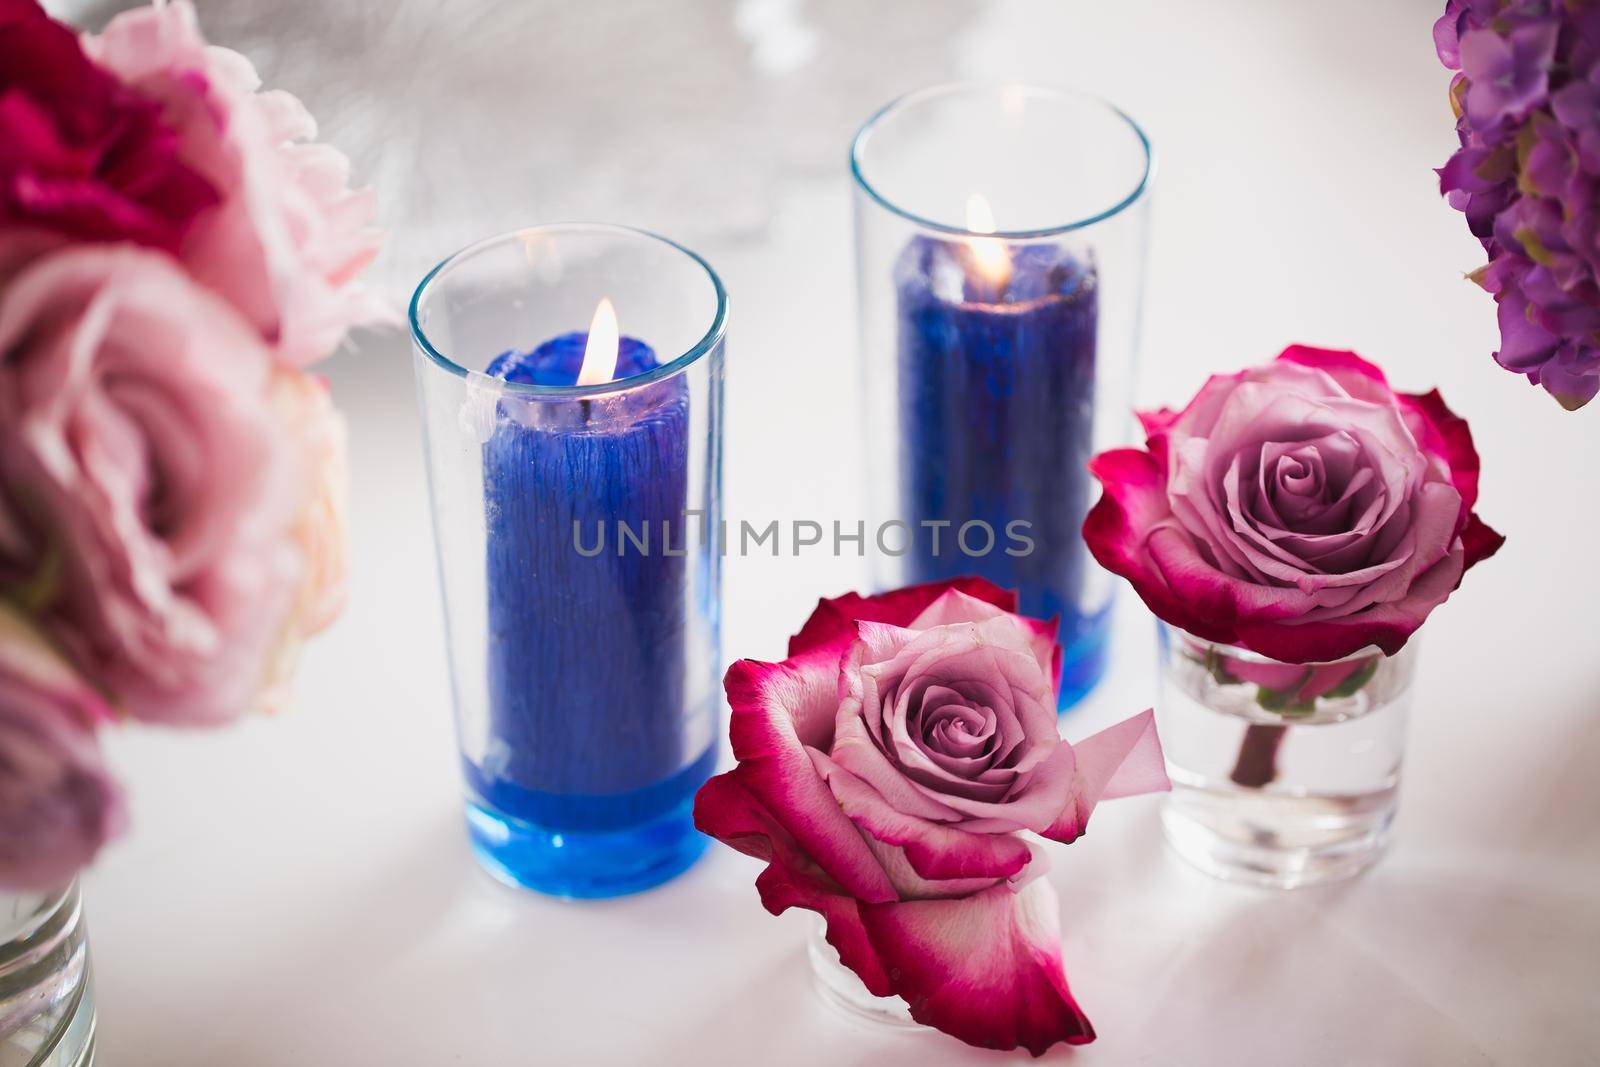 Brightly decorated wedding decor. Beautiful flowers and burning candles.